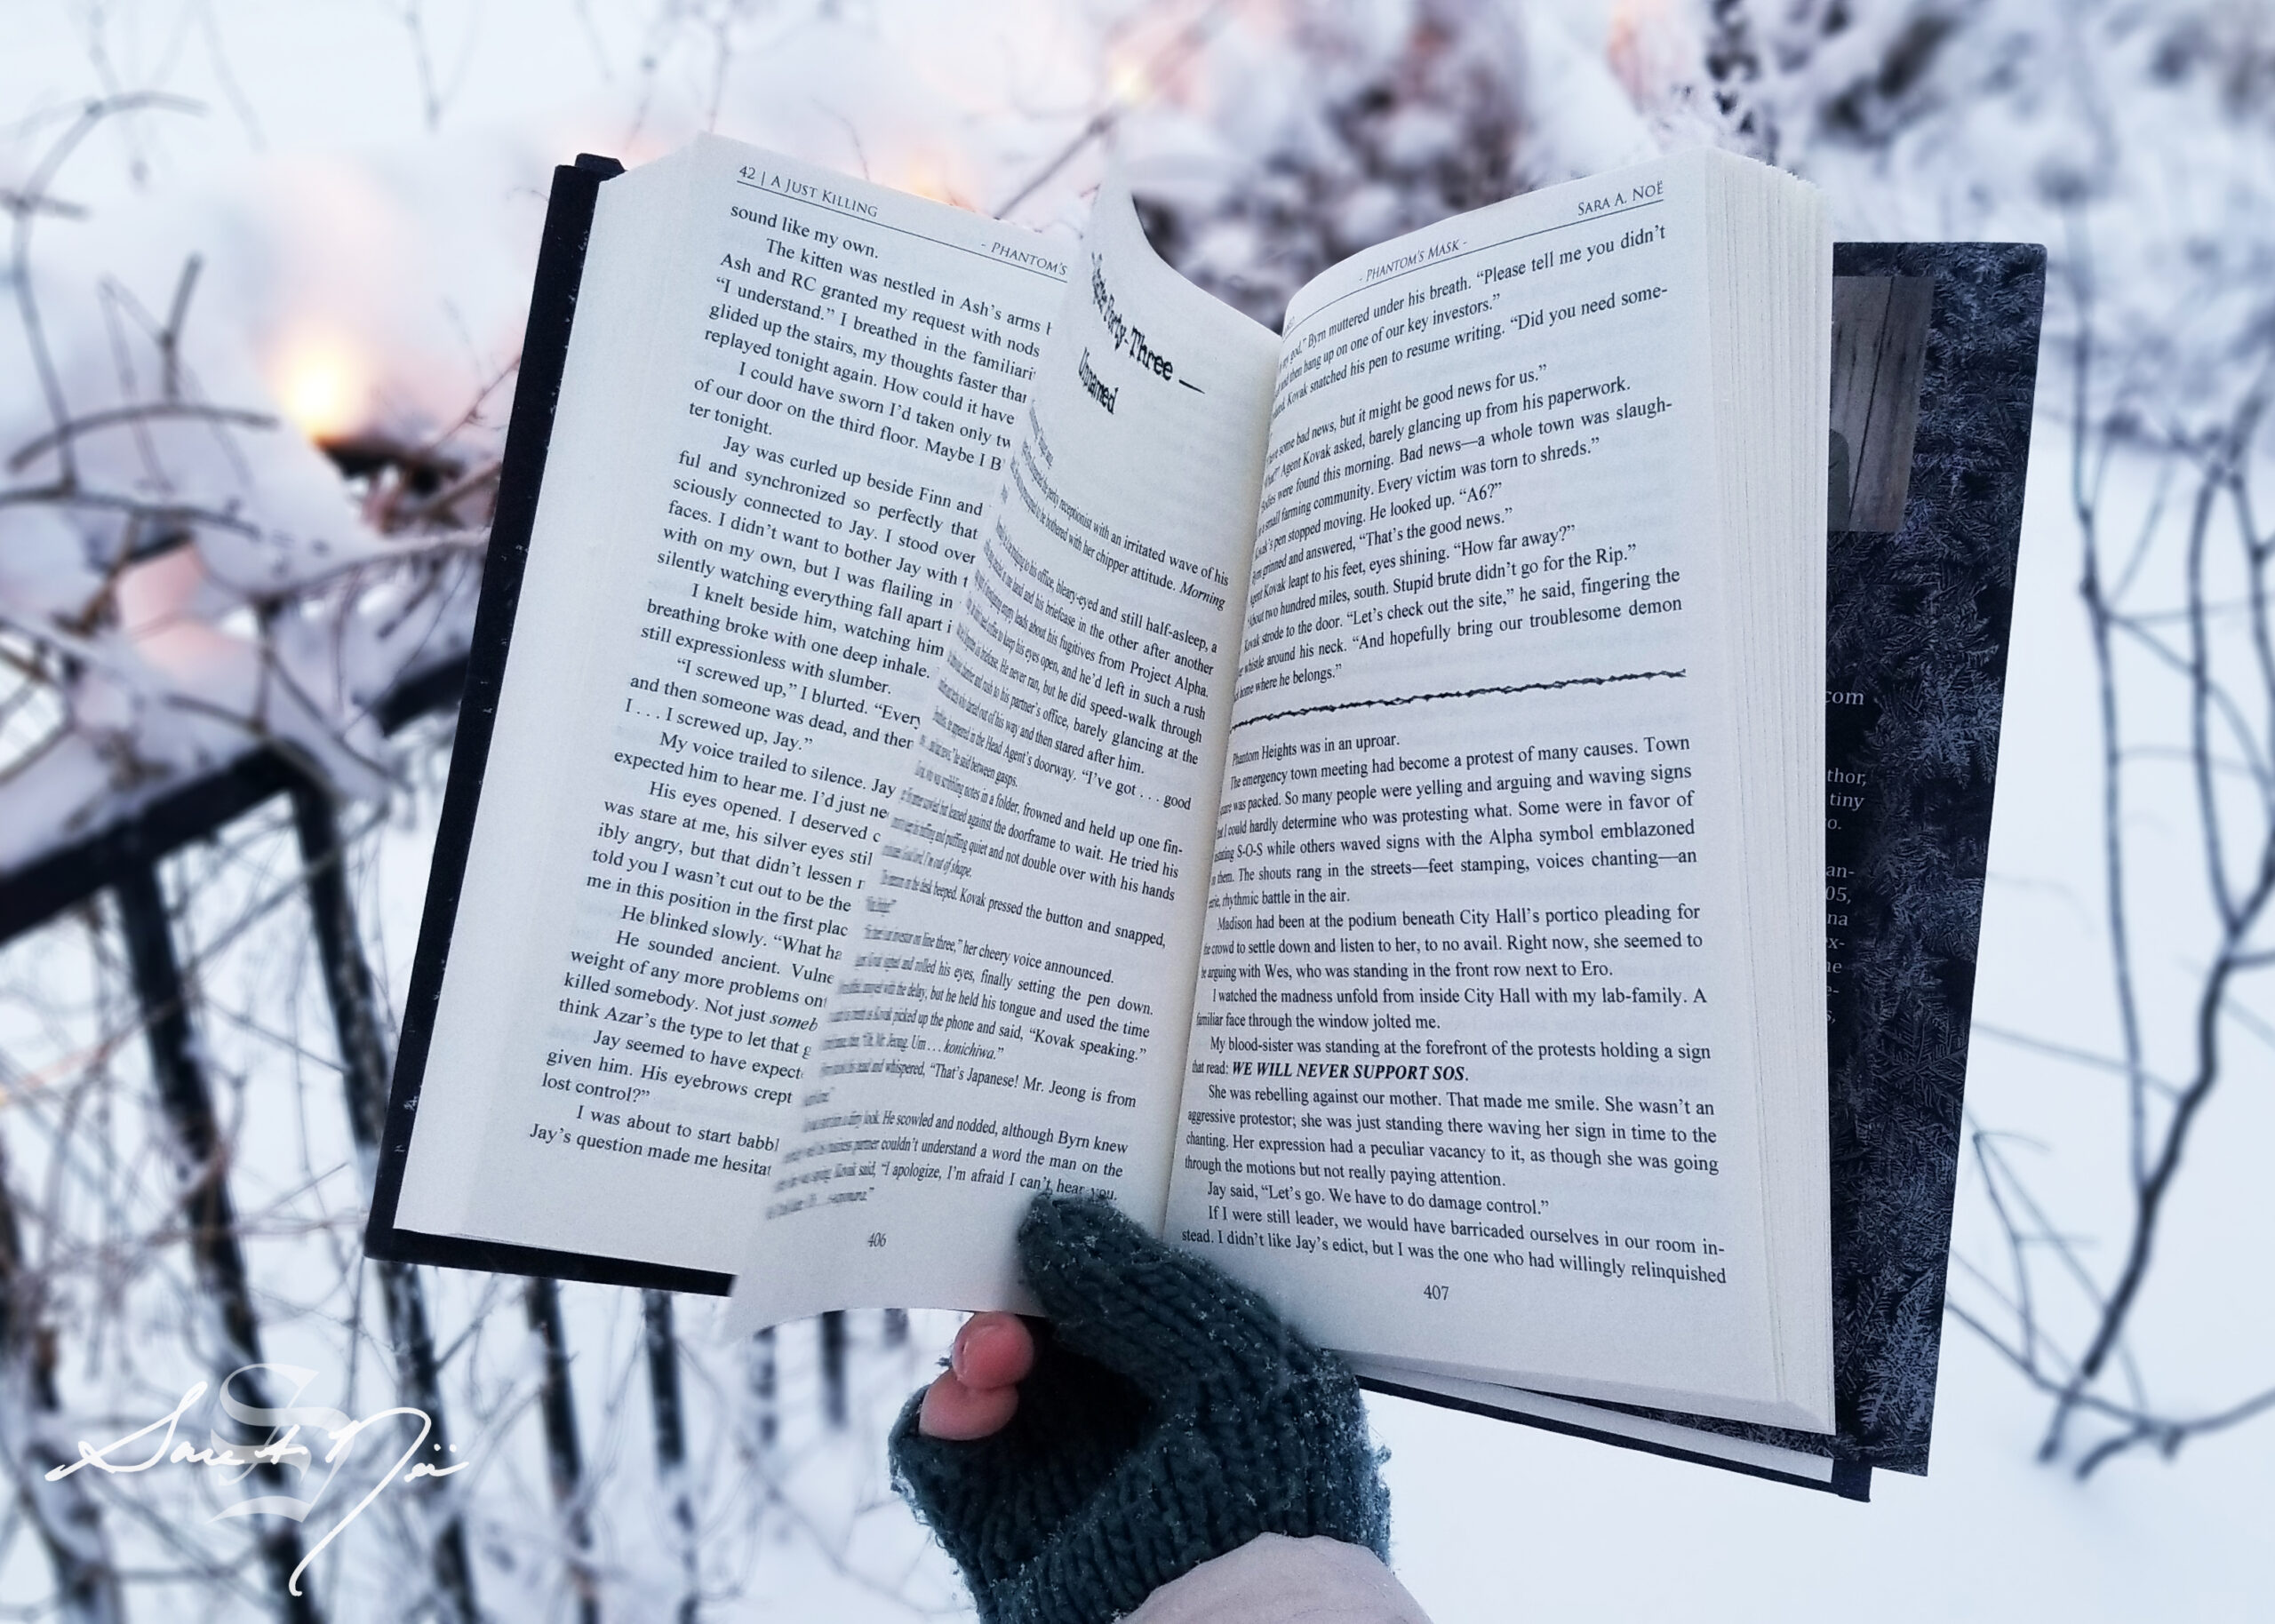 holding an open book in the snow with Christmas lights in the background